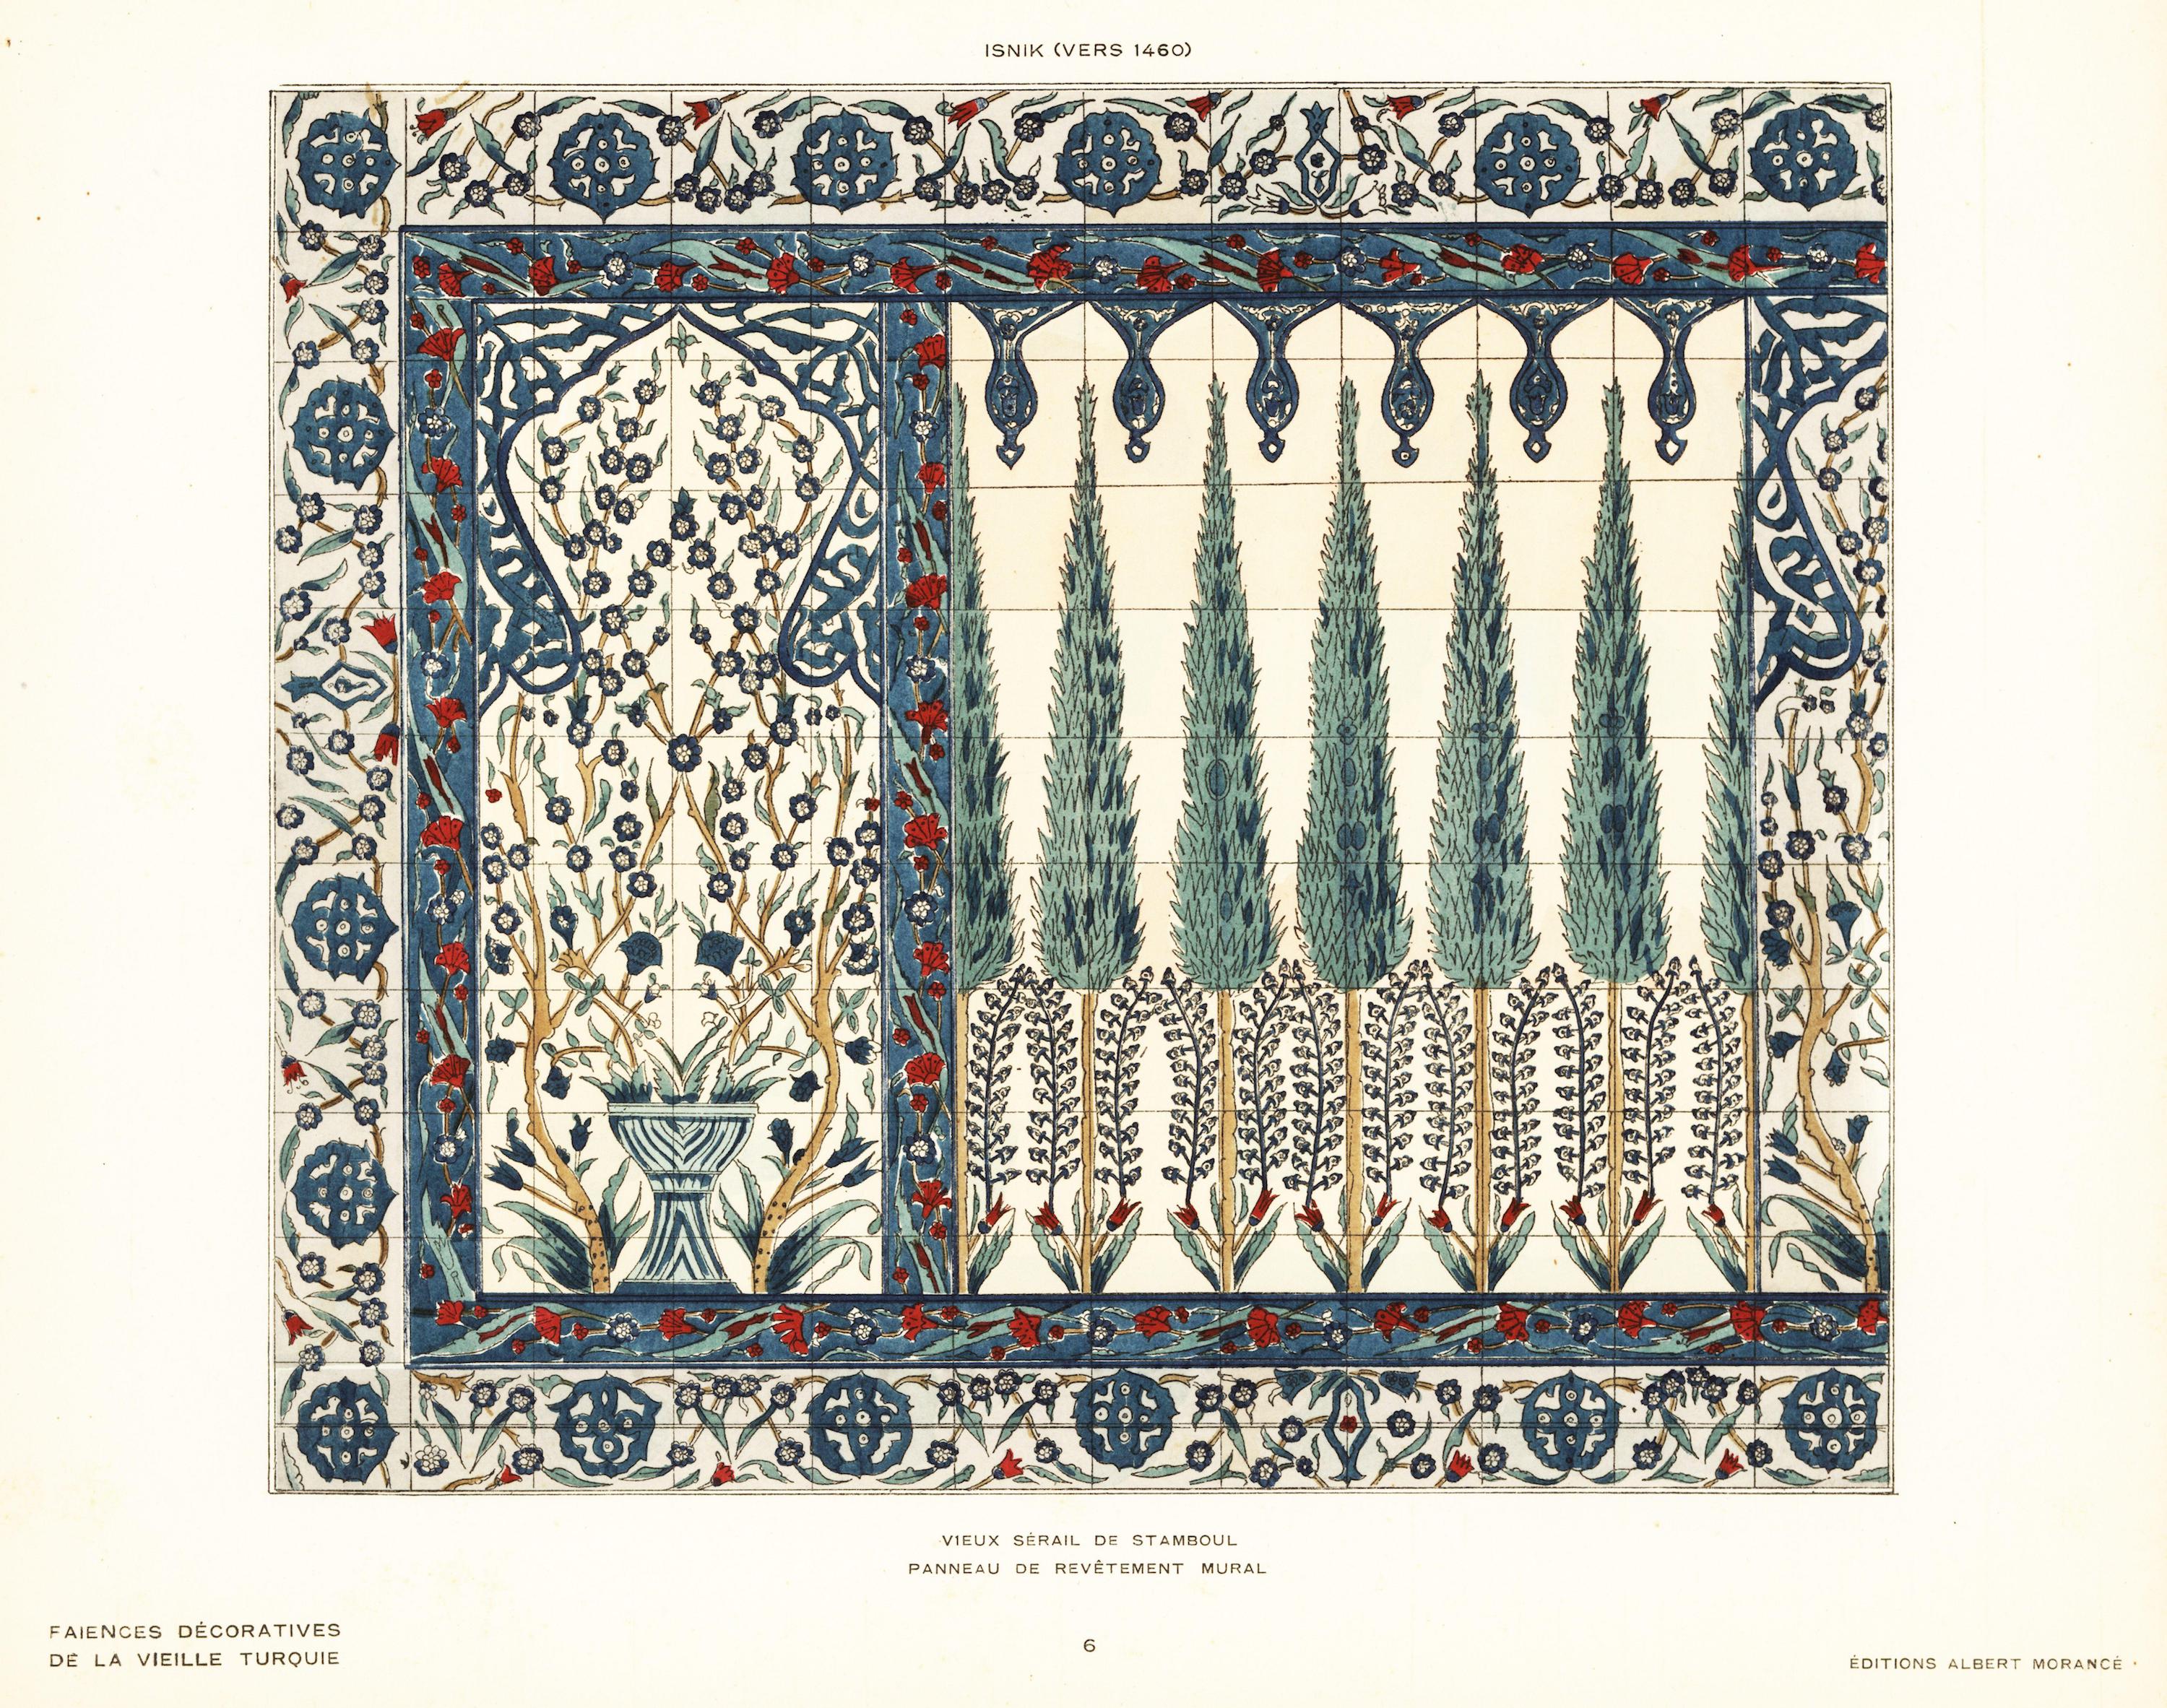 Panel of ceramic wall tiles depicting a garden with tulips, trees, flowers and foliage from Topkapi Palace. Lithograph from Alexandre Raymond’s 'Faience Decorative de la Vieille Turquie', 1927. 